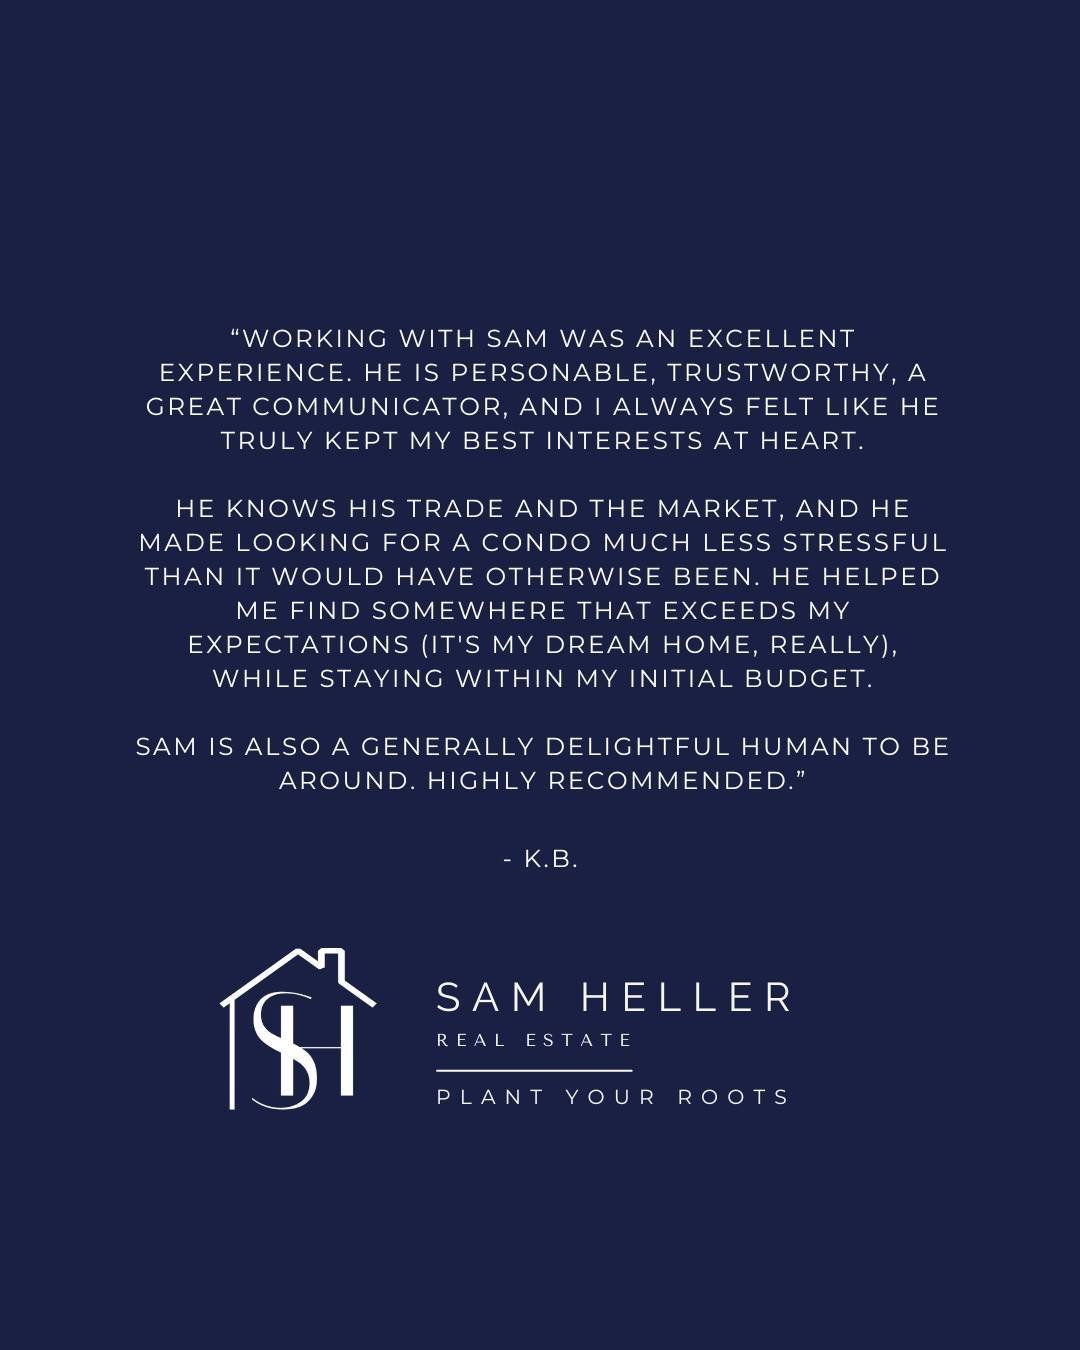 Thank you so much KB for the kind words! It was an absolute pleasure helping you find your dream home. 😊